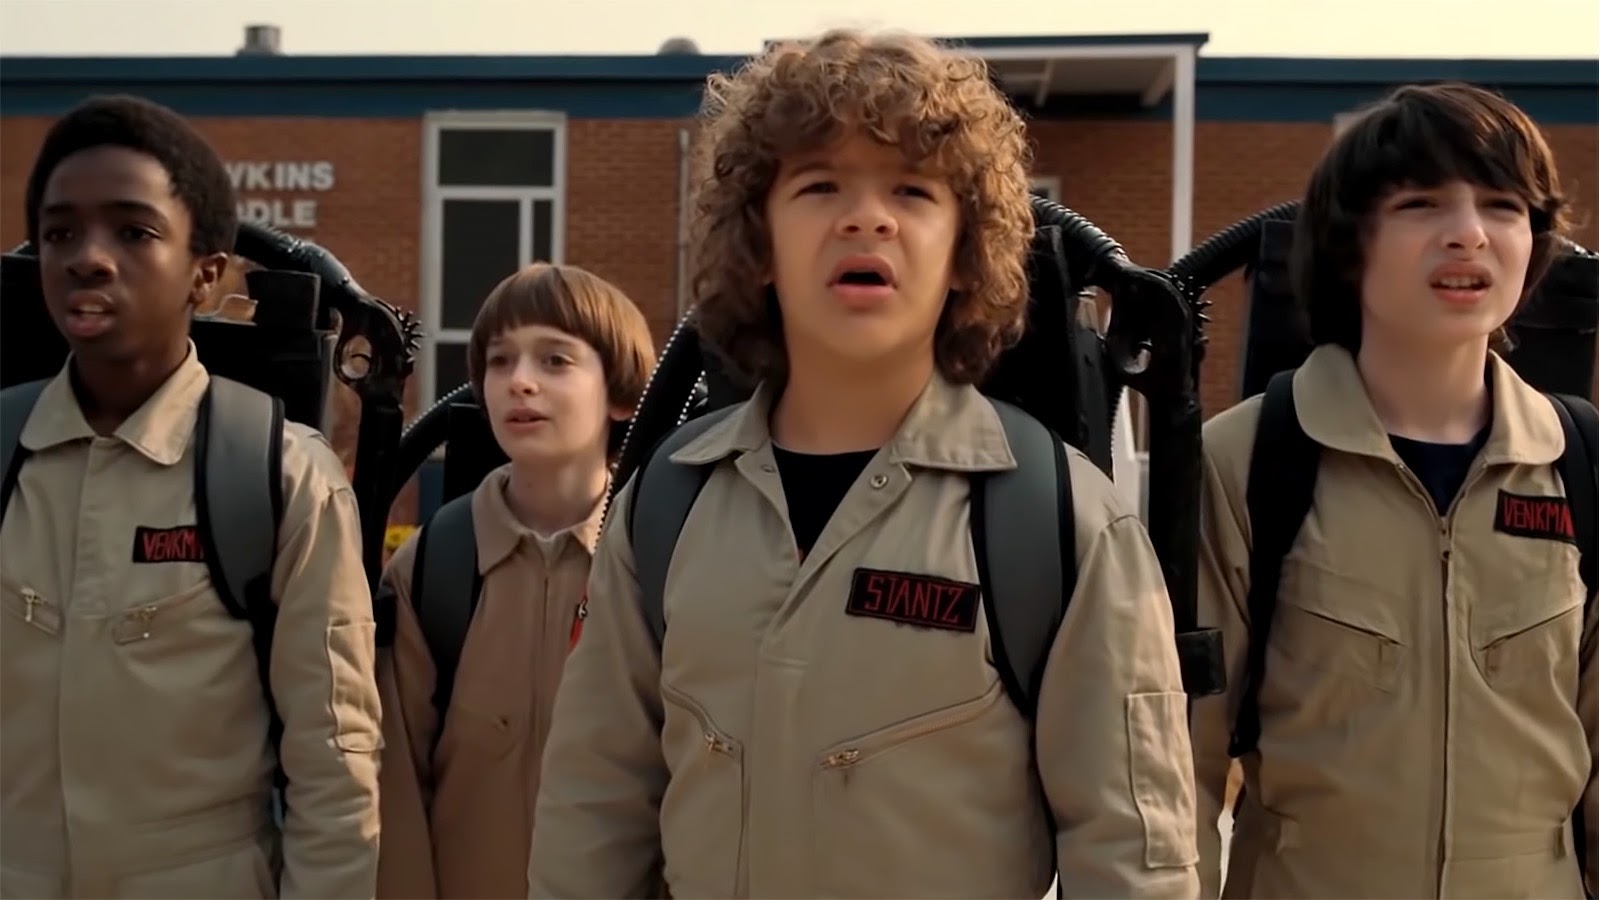 And dressed as a Ghostbuster (right) in Stranger Things. 